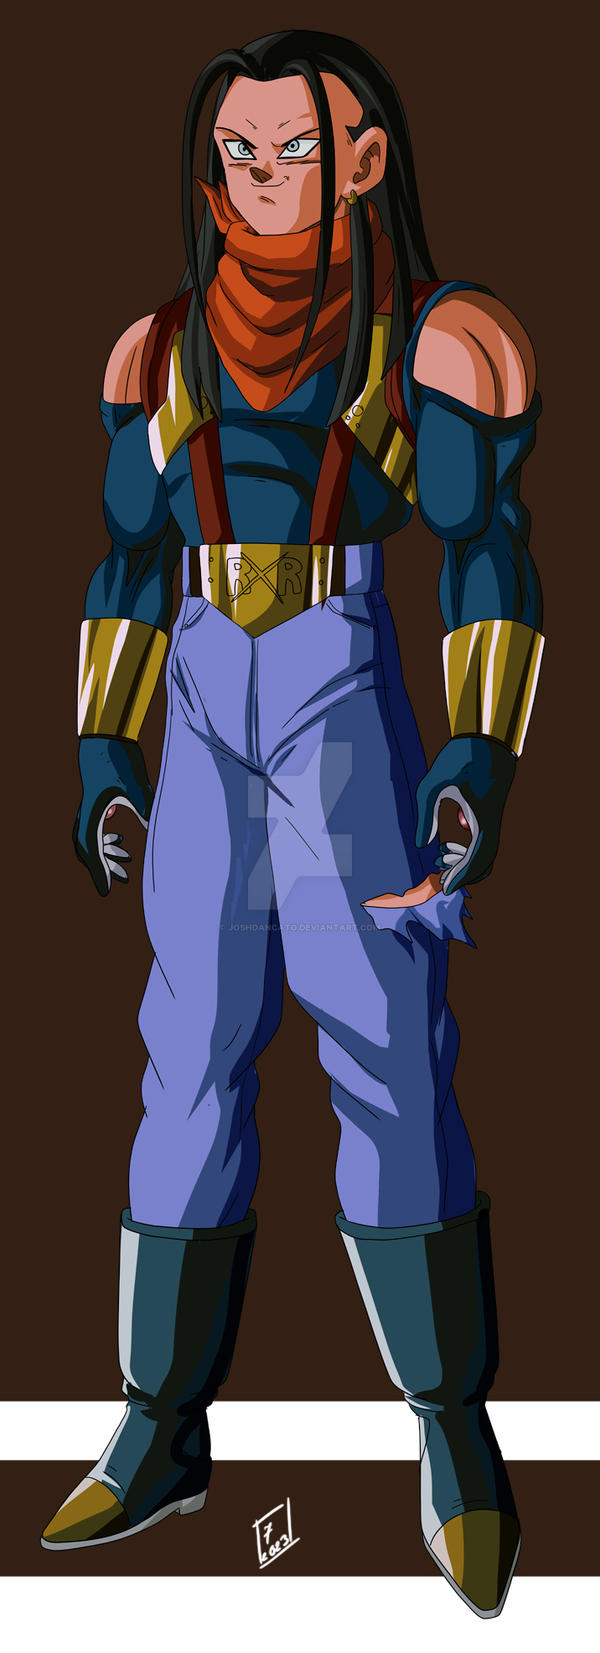 Dragon Ball Z the Antagonist Super Android 17 by joshdancato on